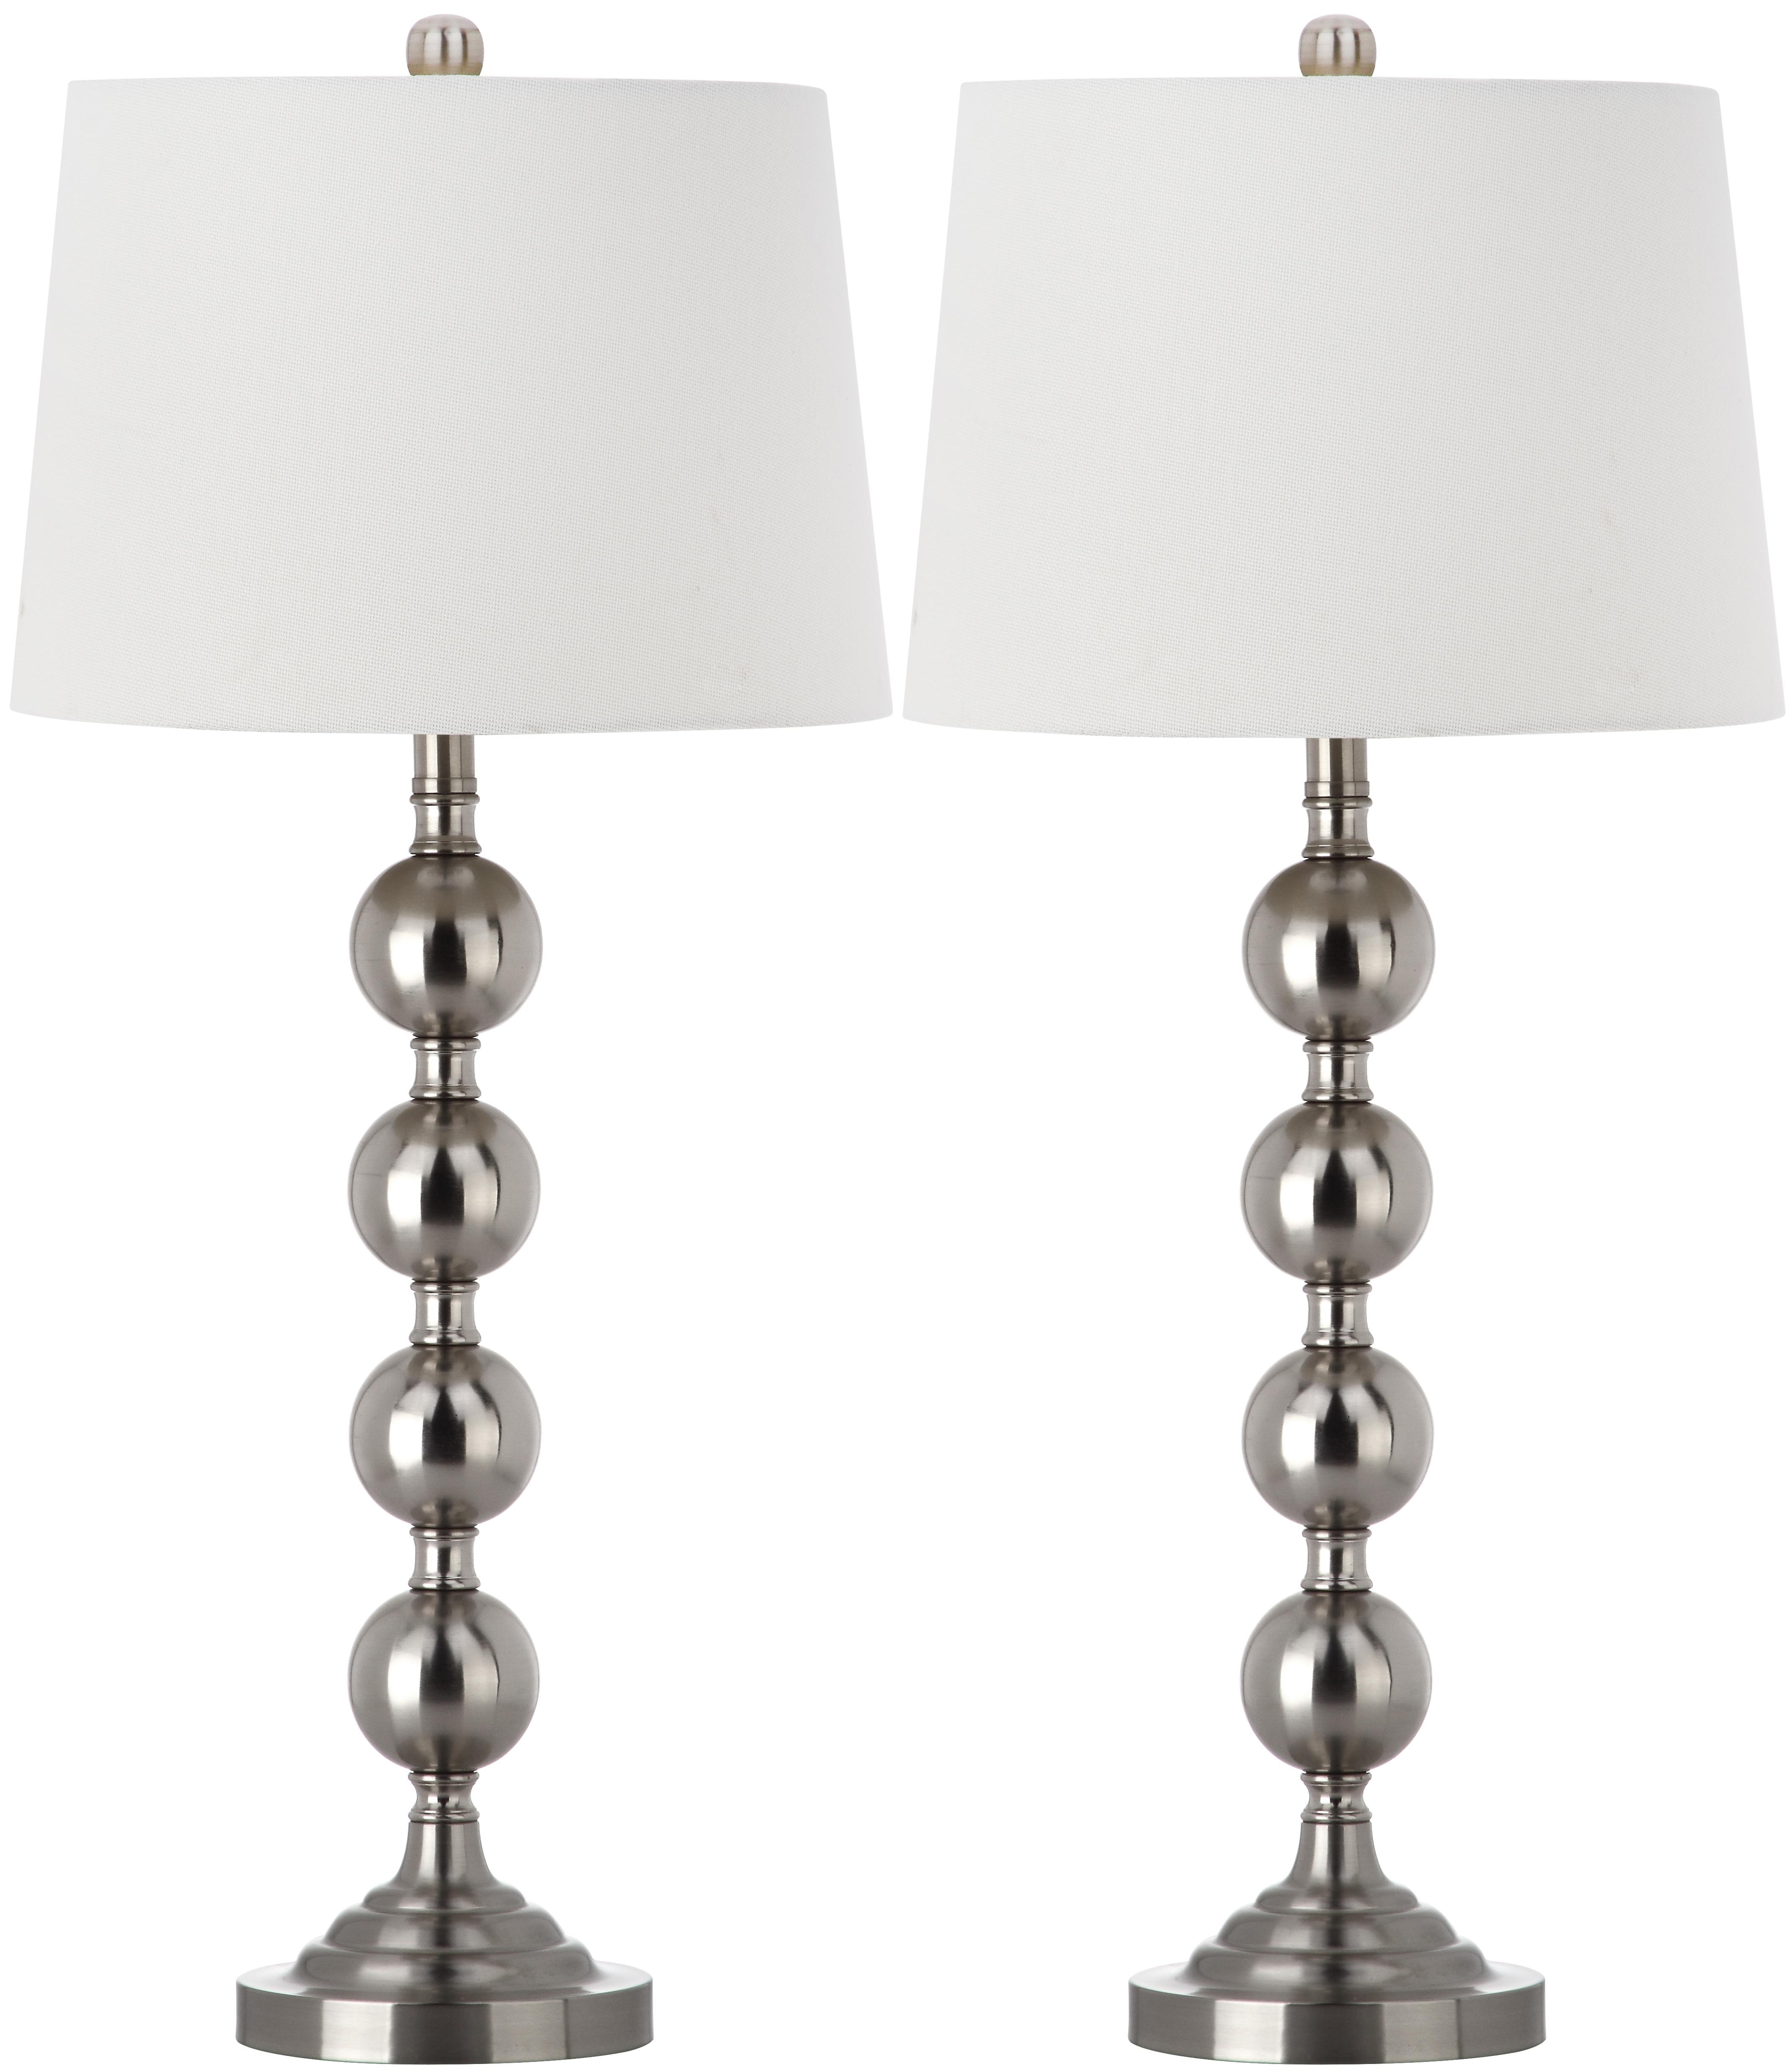 Stacked 32.5-Inch H Gazing Ball Table Lamp - Nickel - Arlo Home - Arlo Home